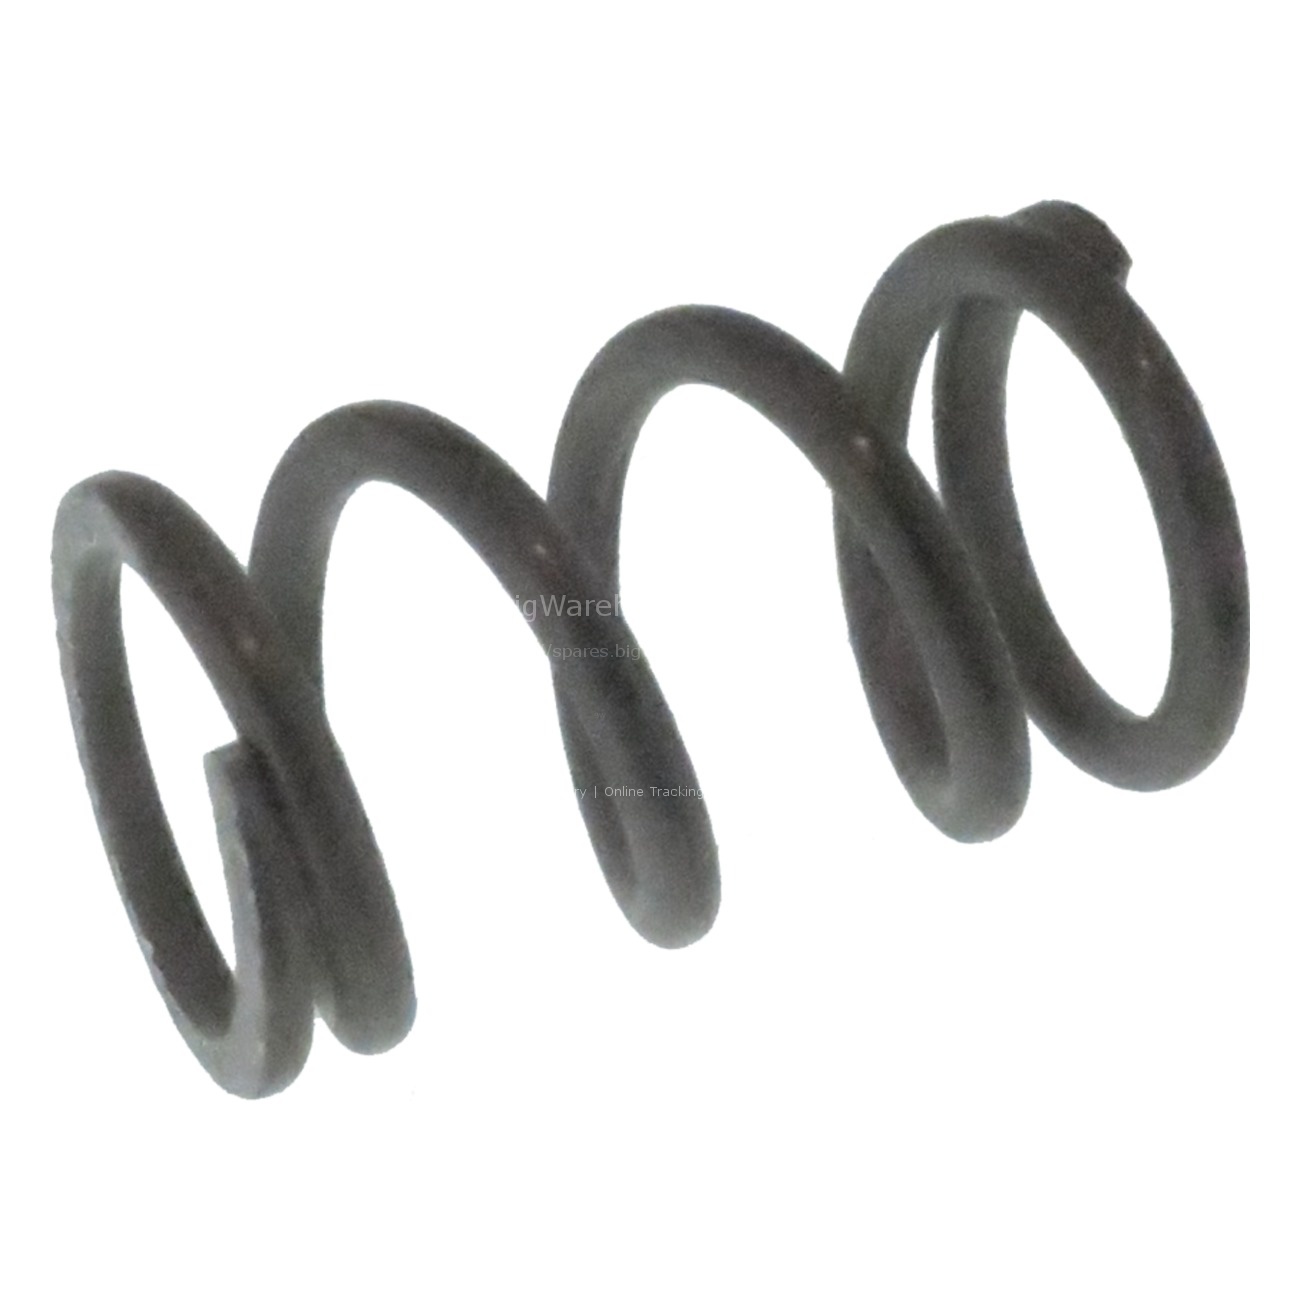 ARTICULATED NOZZLE SPRING